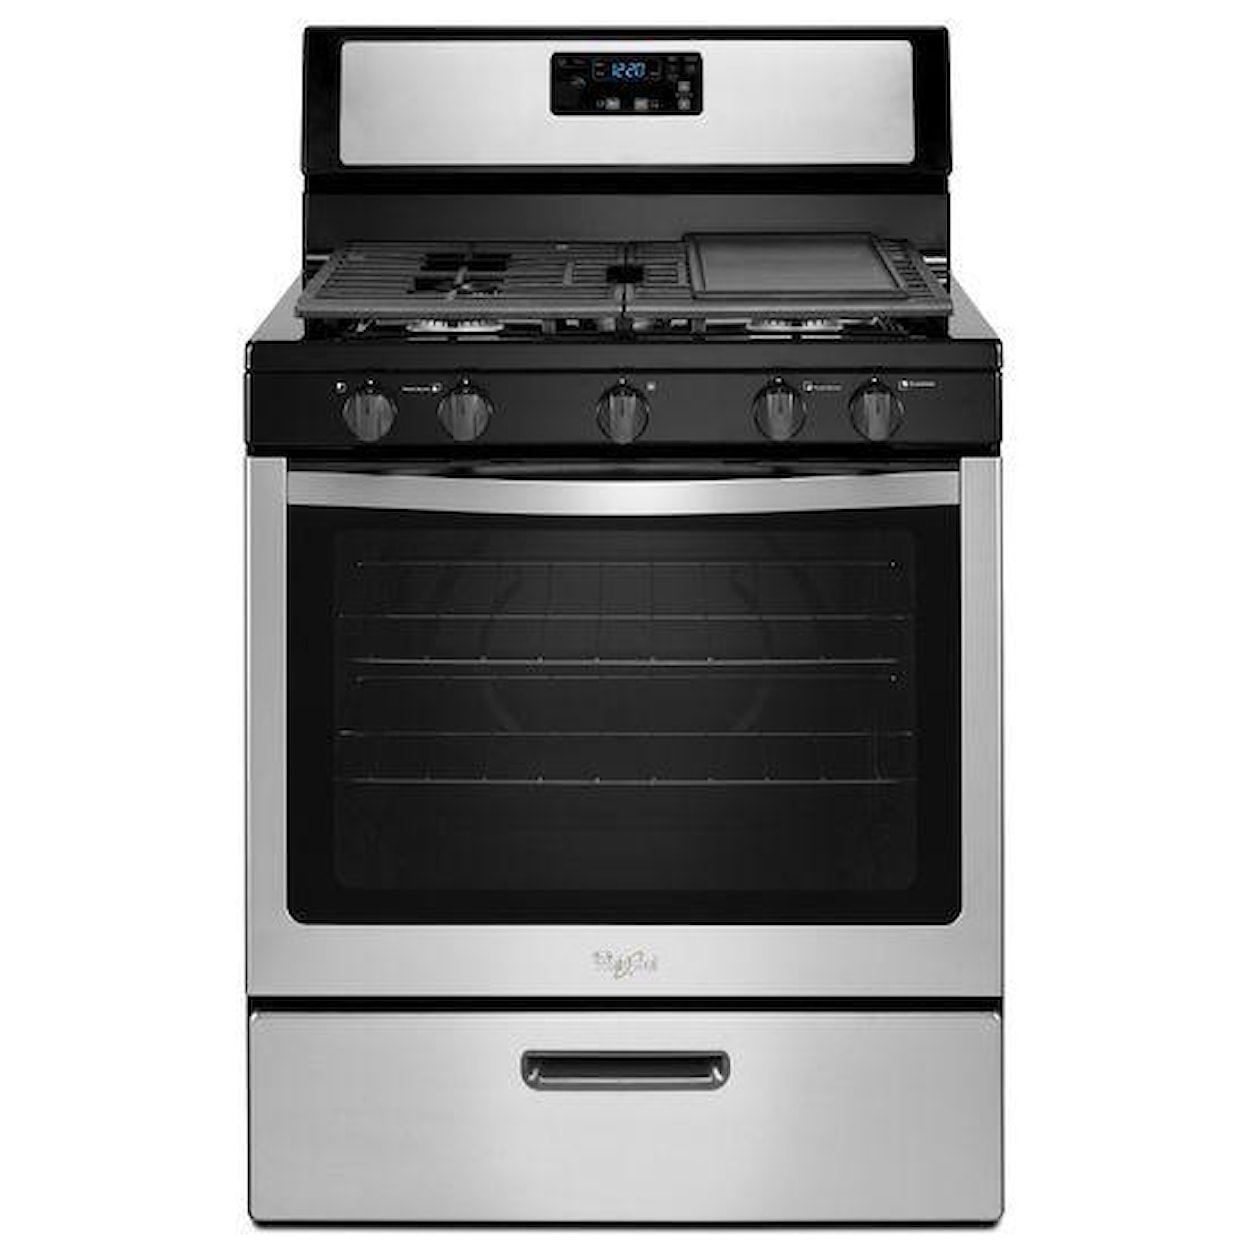 Whirlpool Gas Ranges 5.1 cu. ft. Freestanding Gas Range with Five